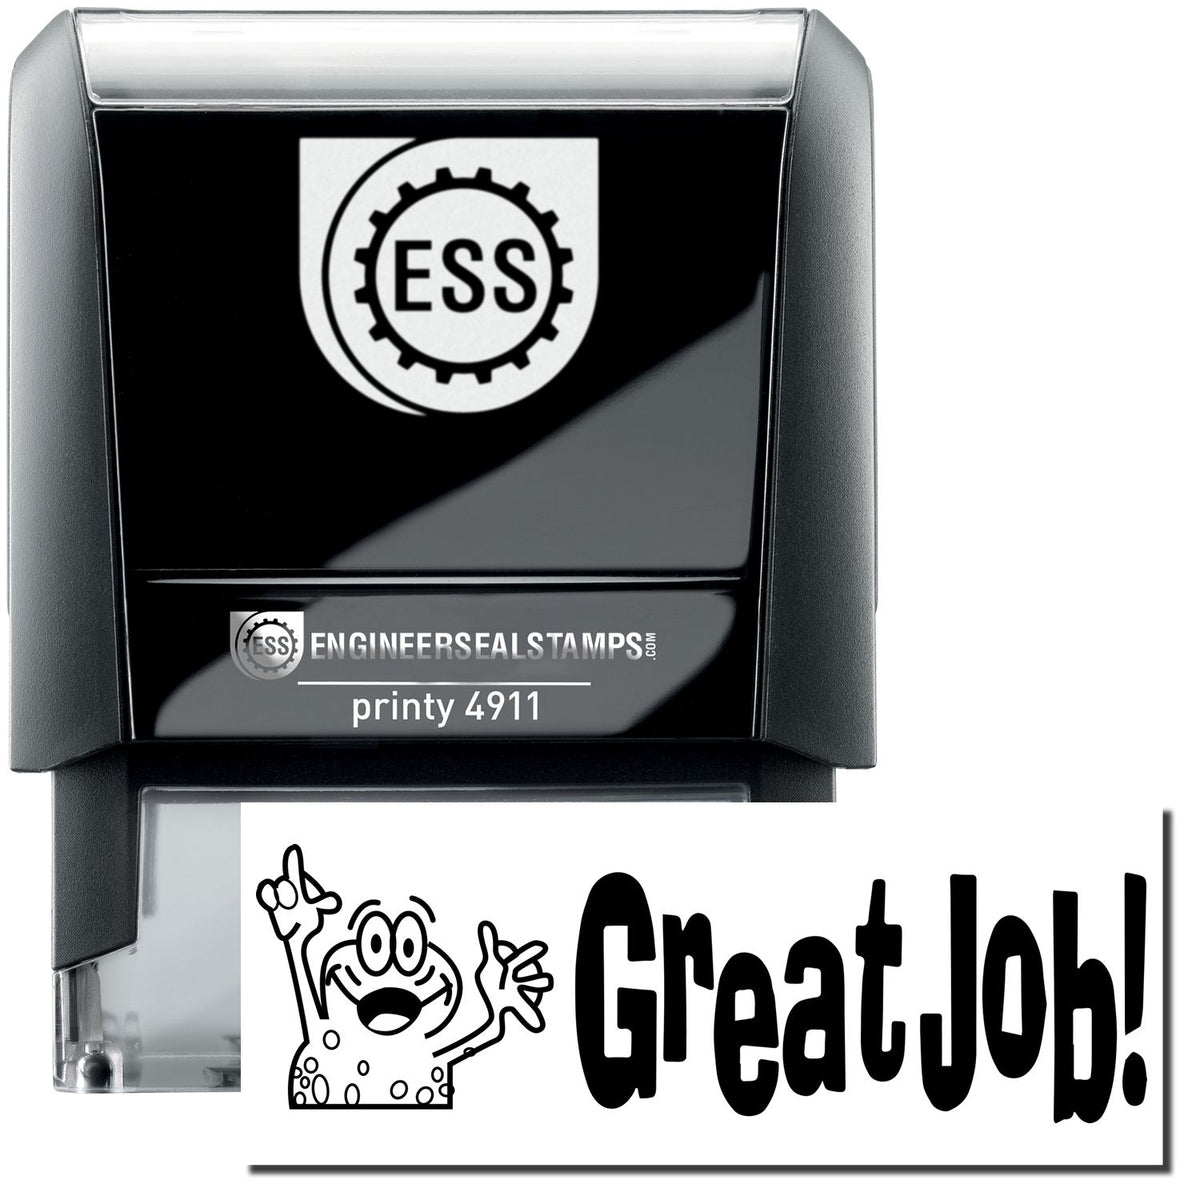 A self-inking stamp with a stamped image showing how the text &quot;Great Job!&quot; with an image of a frog with its hand up in the air is displayed after stamping.